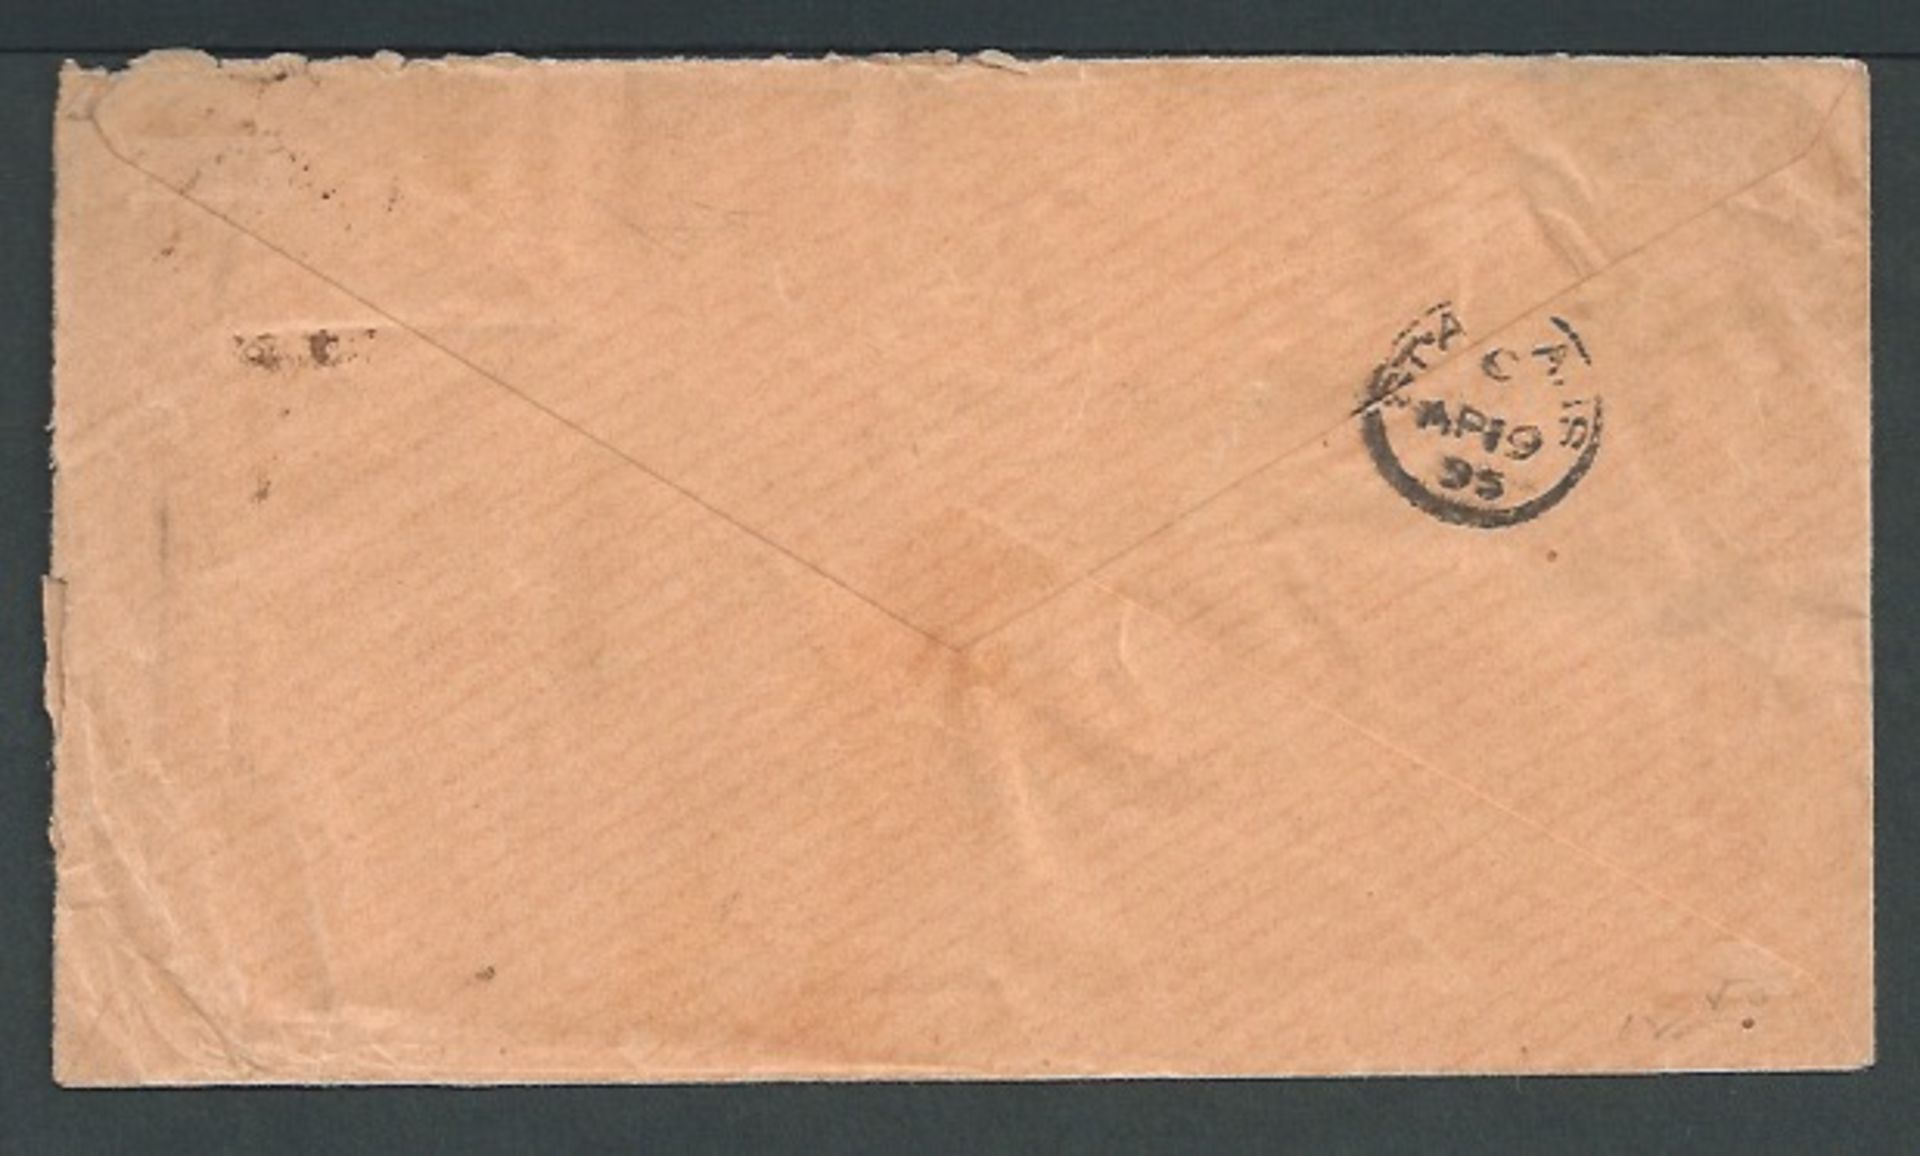 Gold Coast 1895 Cover to England franked by five 1/2d stamps tied by four strikes of the "PAID / LI - Image 2 of 2